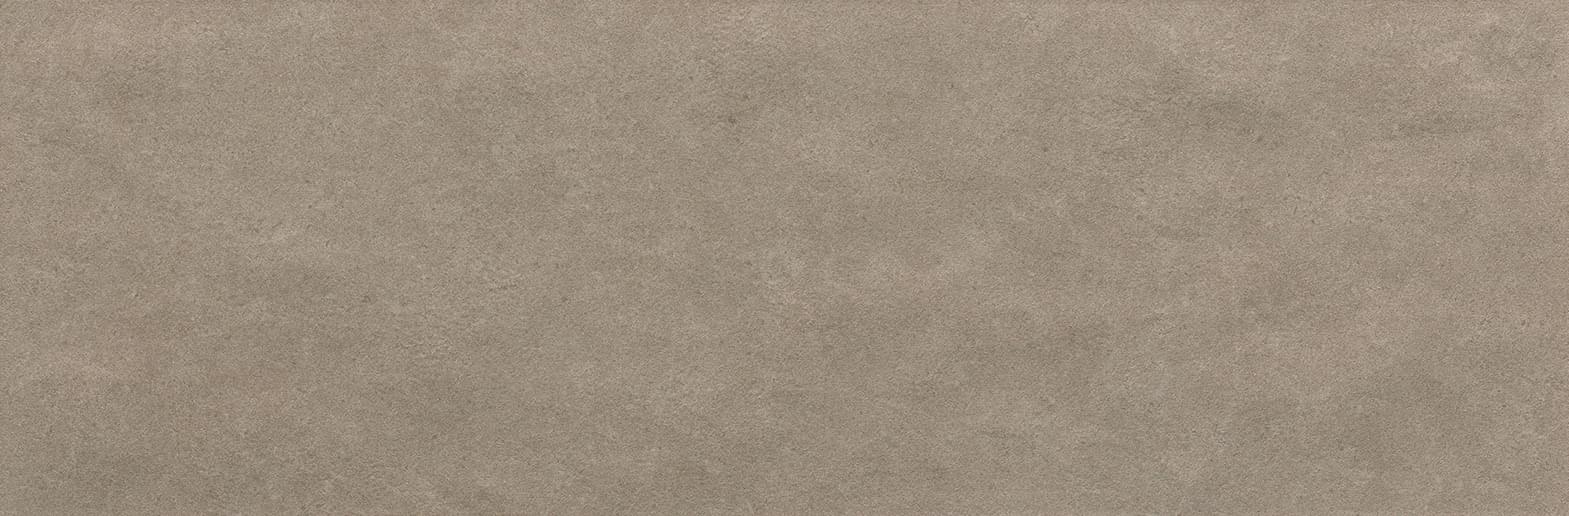 Fap Sheer Taupe 25x75